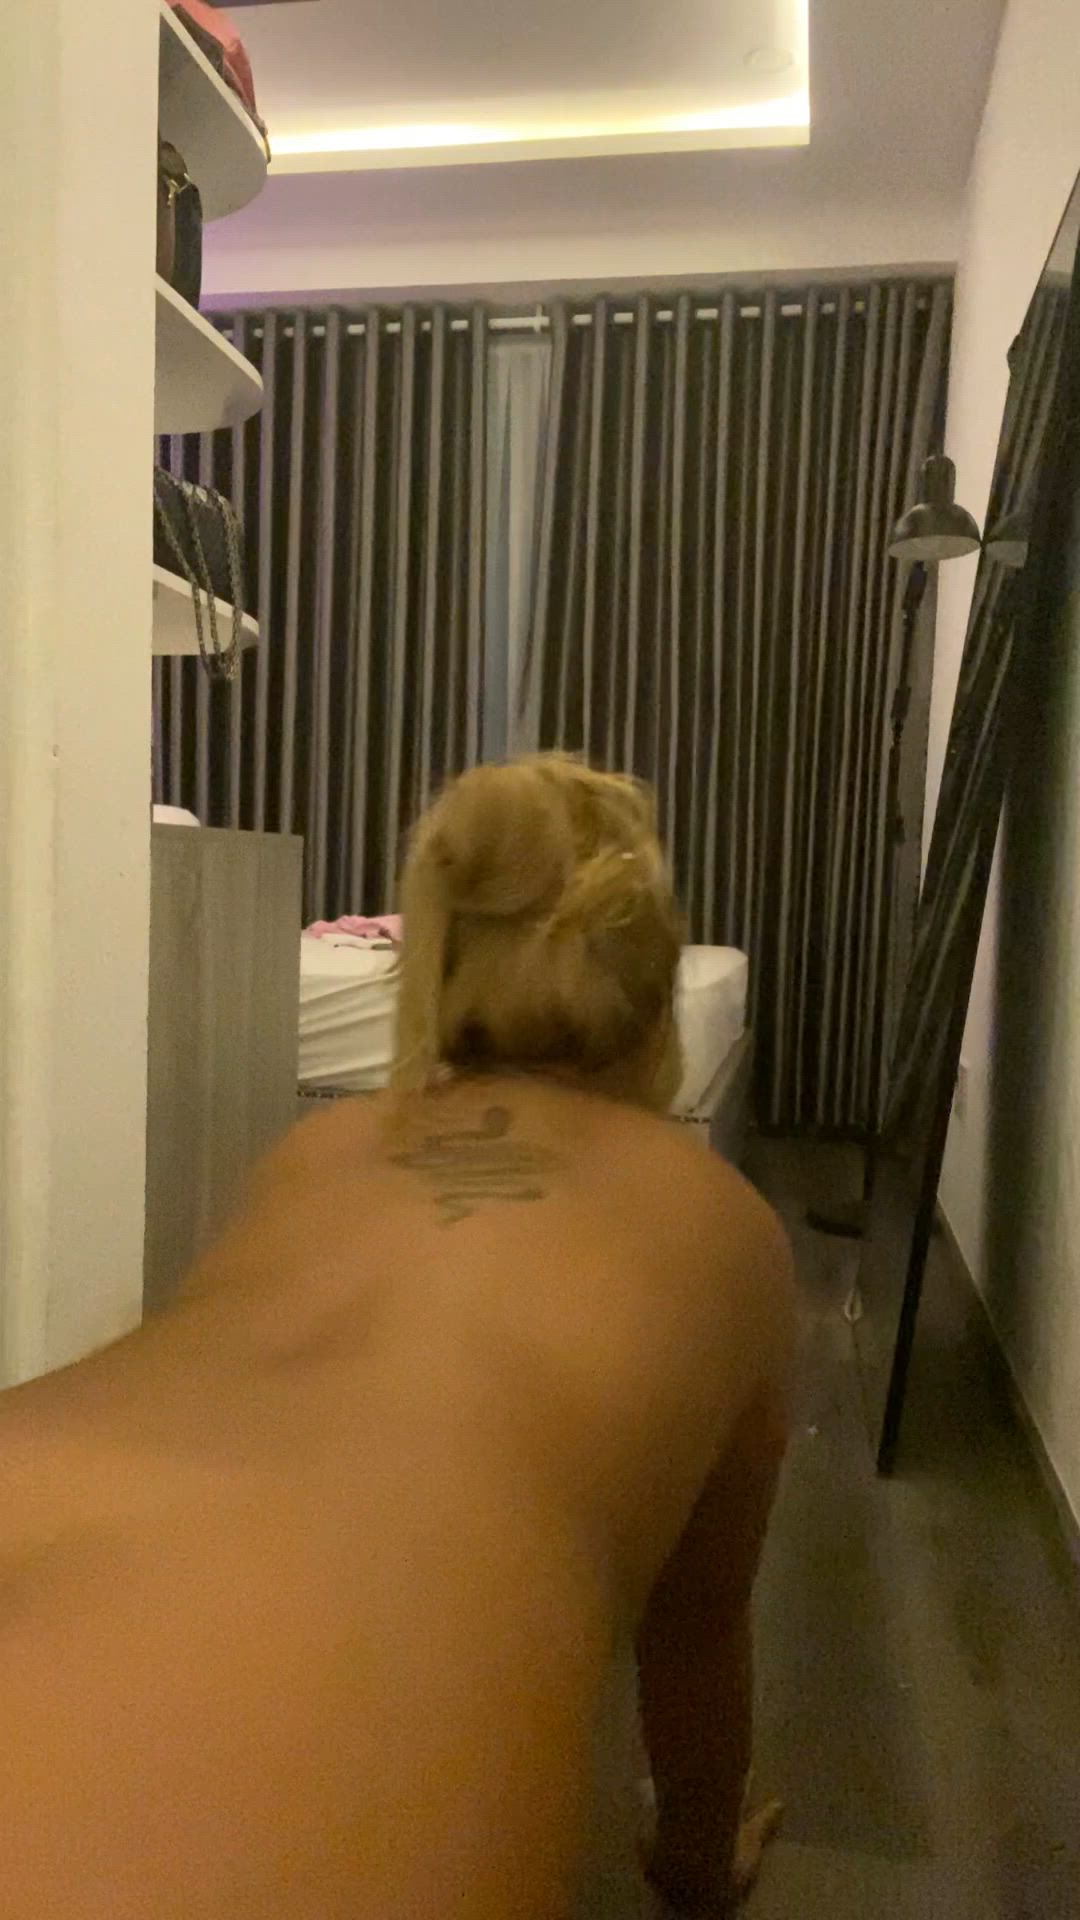 Ass porn video with onlyfans model claraexo <strong>@itsclaraexotic</strong>